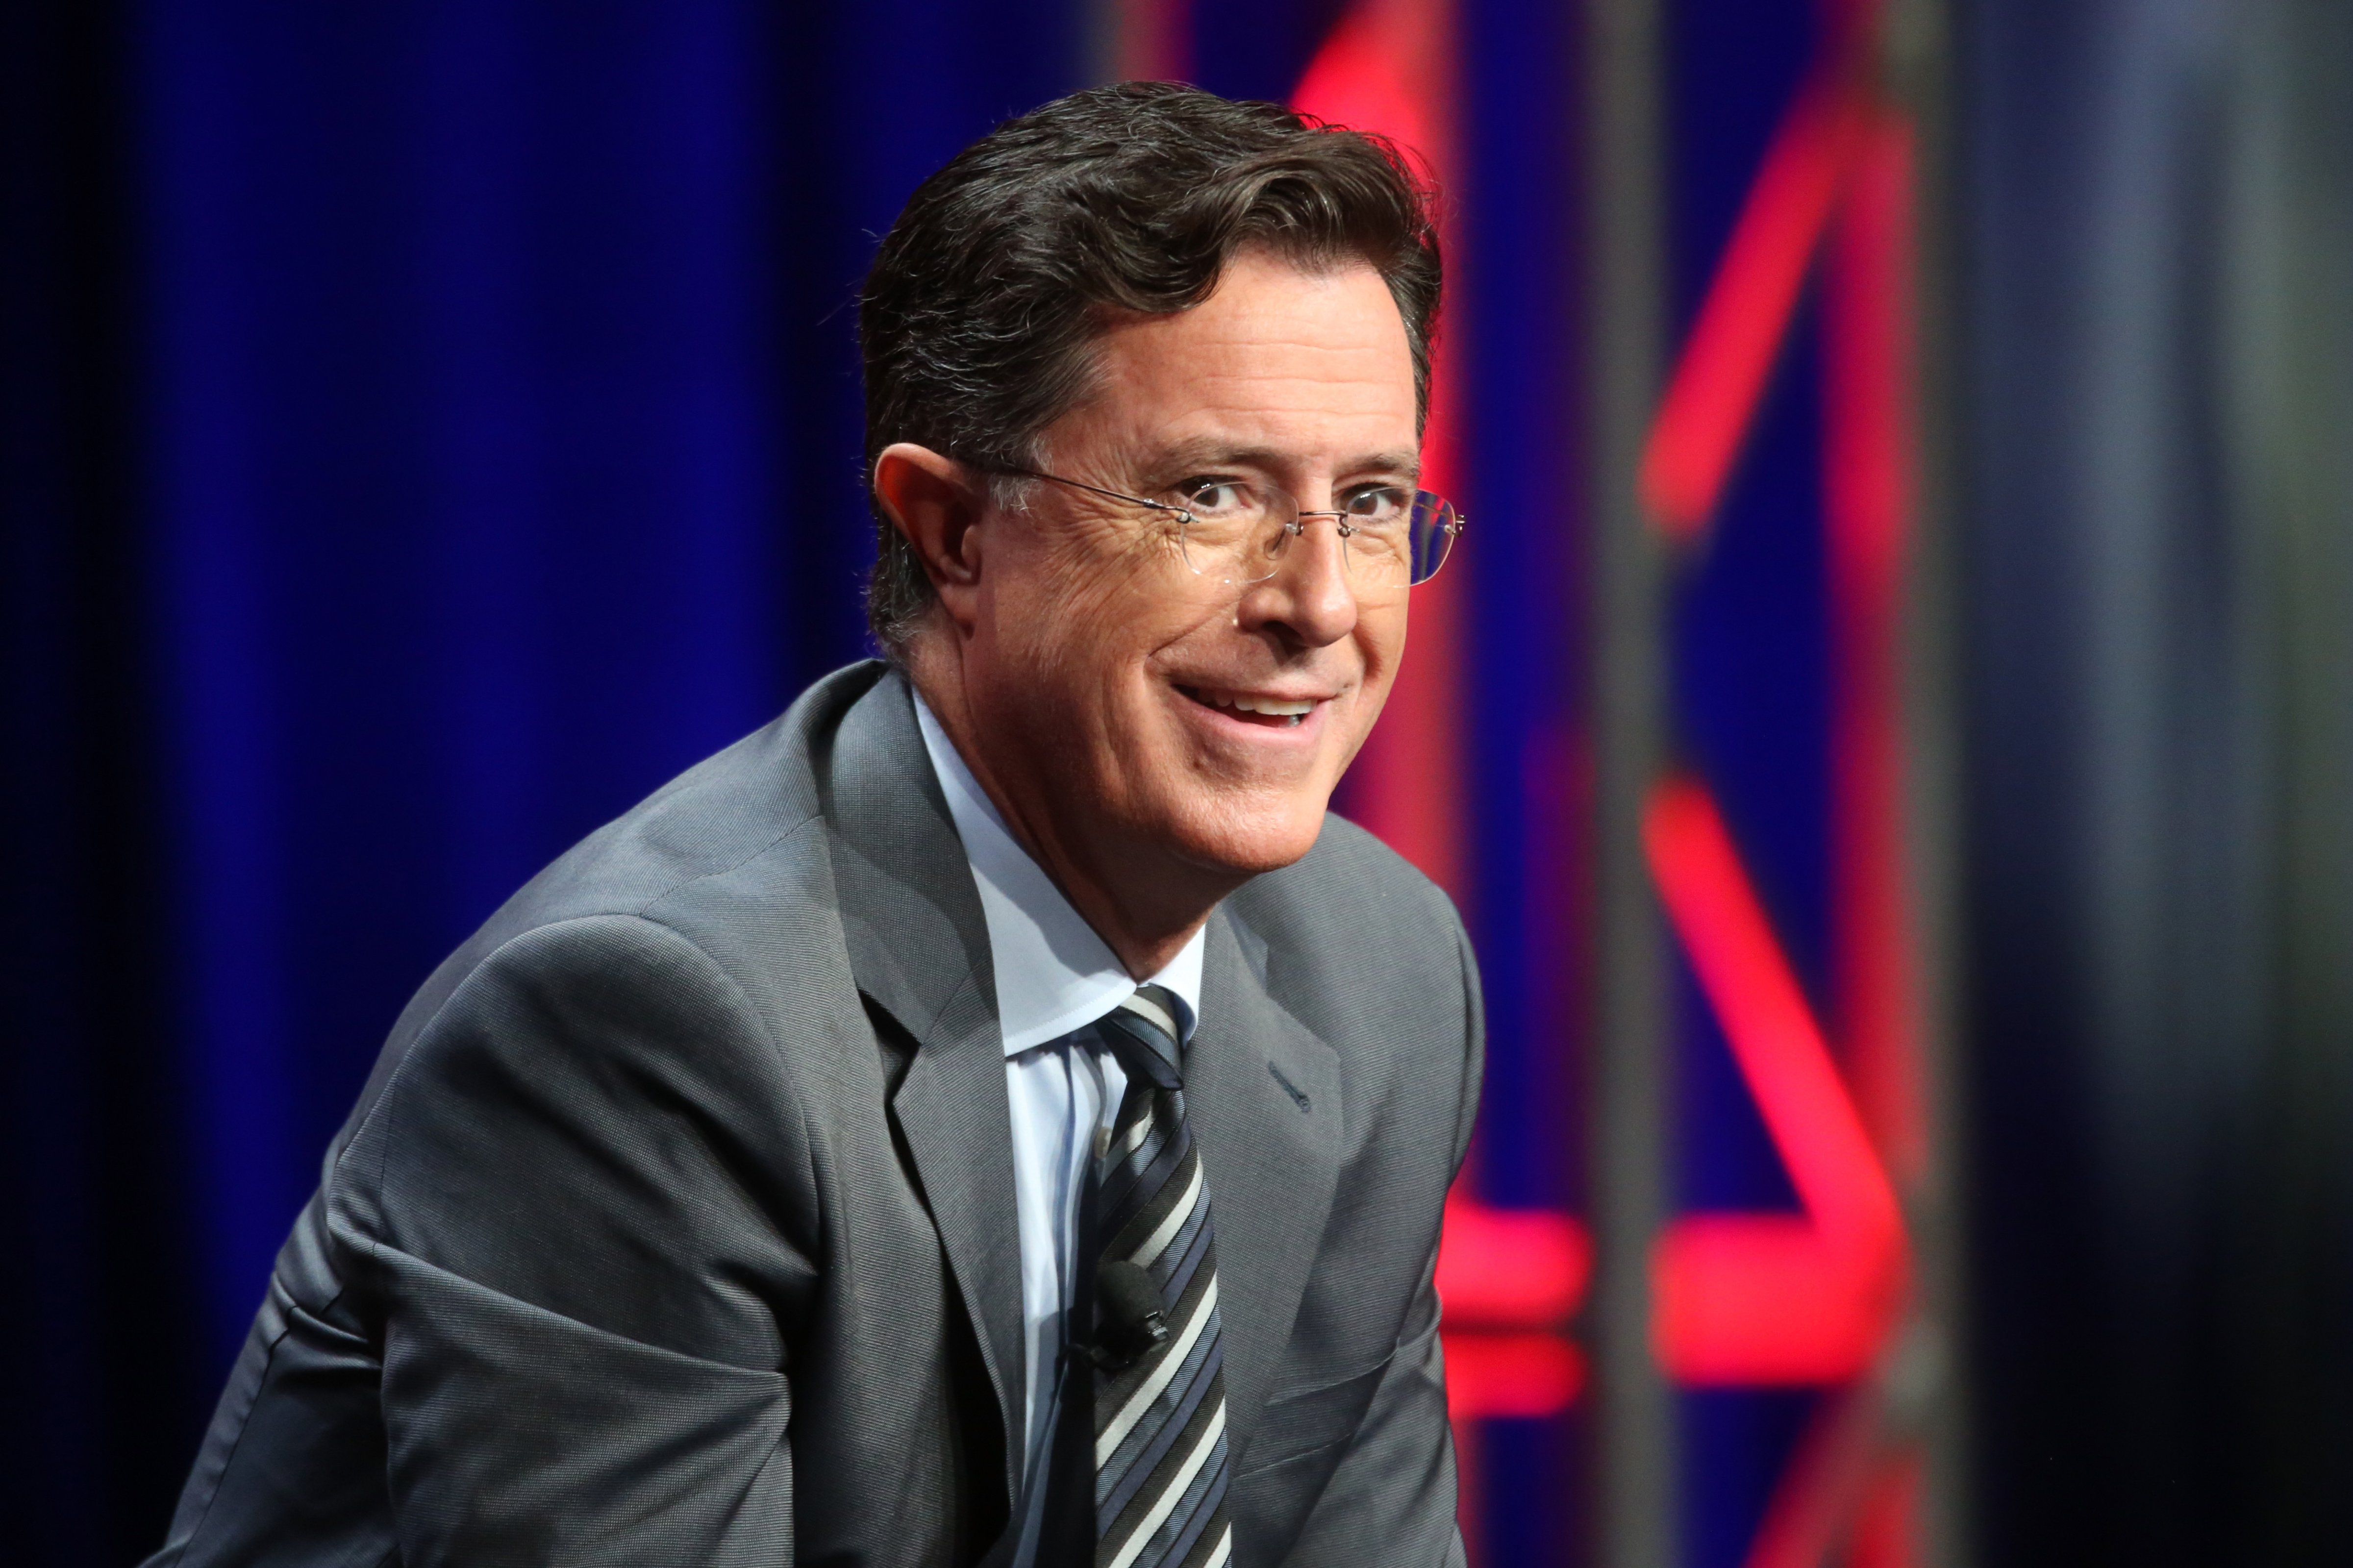 Stephen Colbert onstage during the 'The Late Show with Stephen Colbert' panel discussion at the CBS portion of the 2015 Summer TCA Tour at The Beverly Hilton Hotel on August 10, 2015 in Beverly Hills, California. (Frederick M. Brown&mdash;2015 Getty Images)